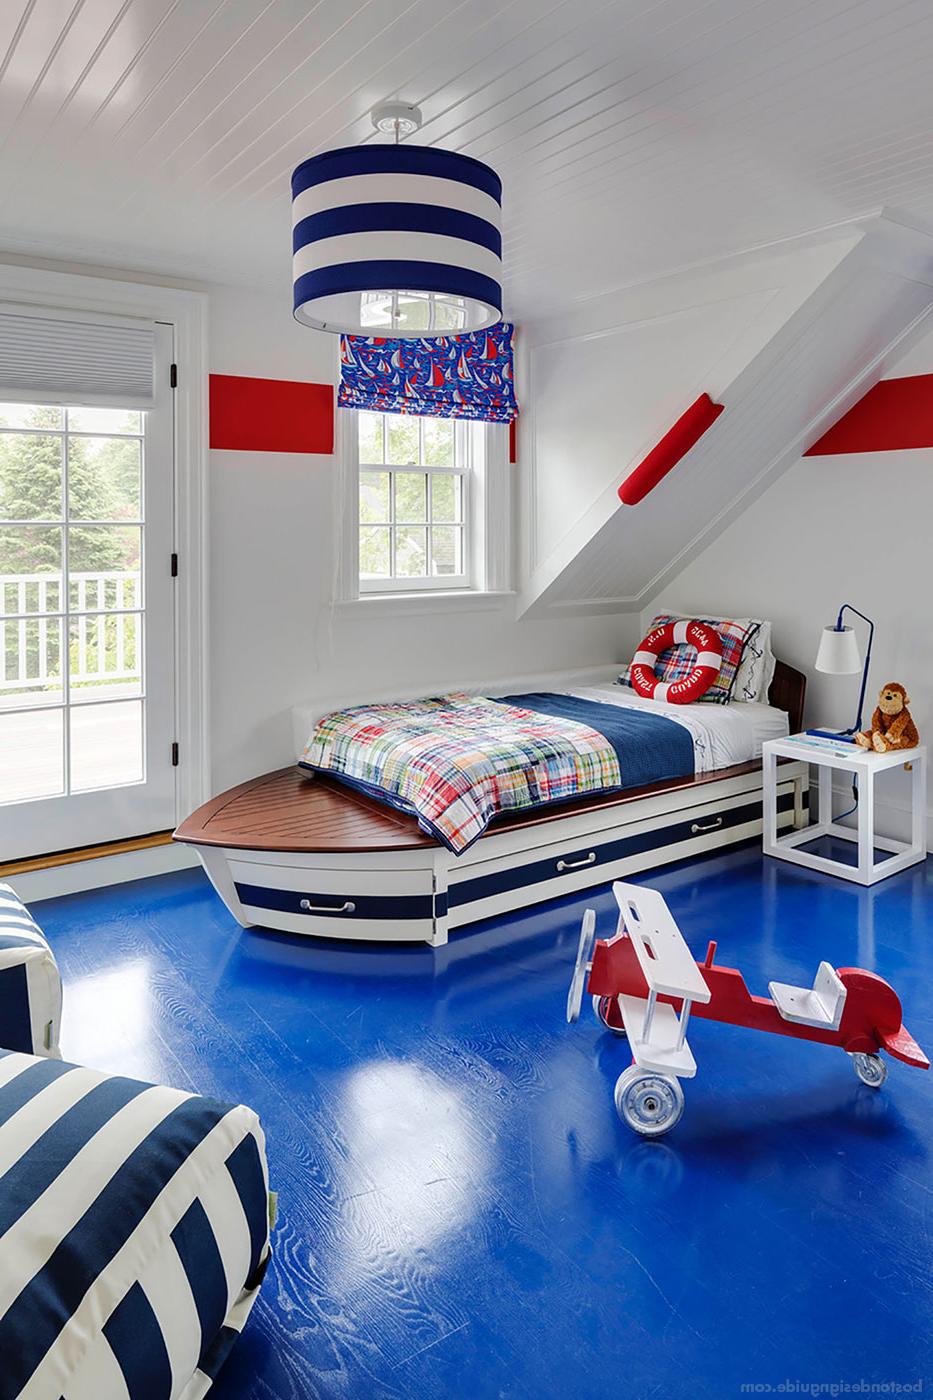 Nautical red, white and blue children's room by Patrick Ahearn Architect